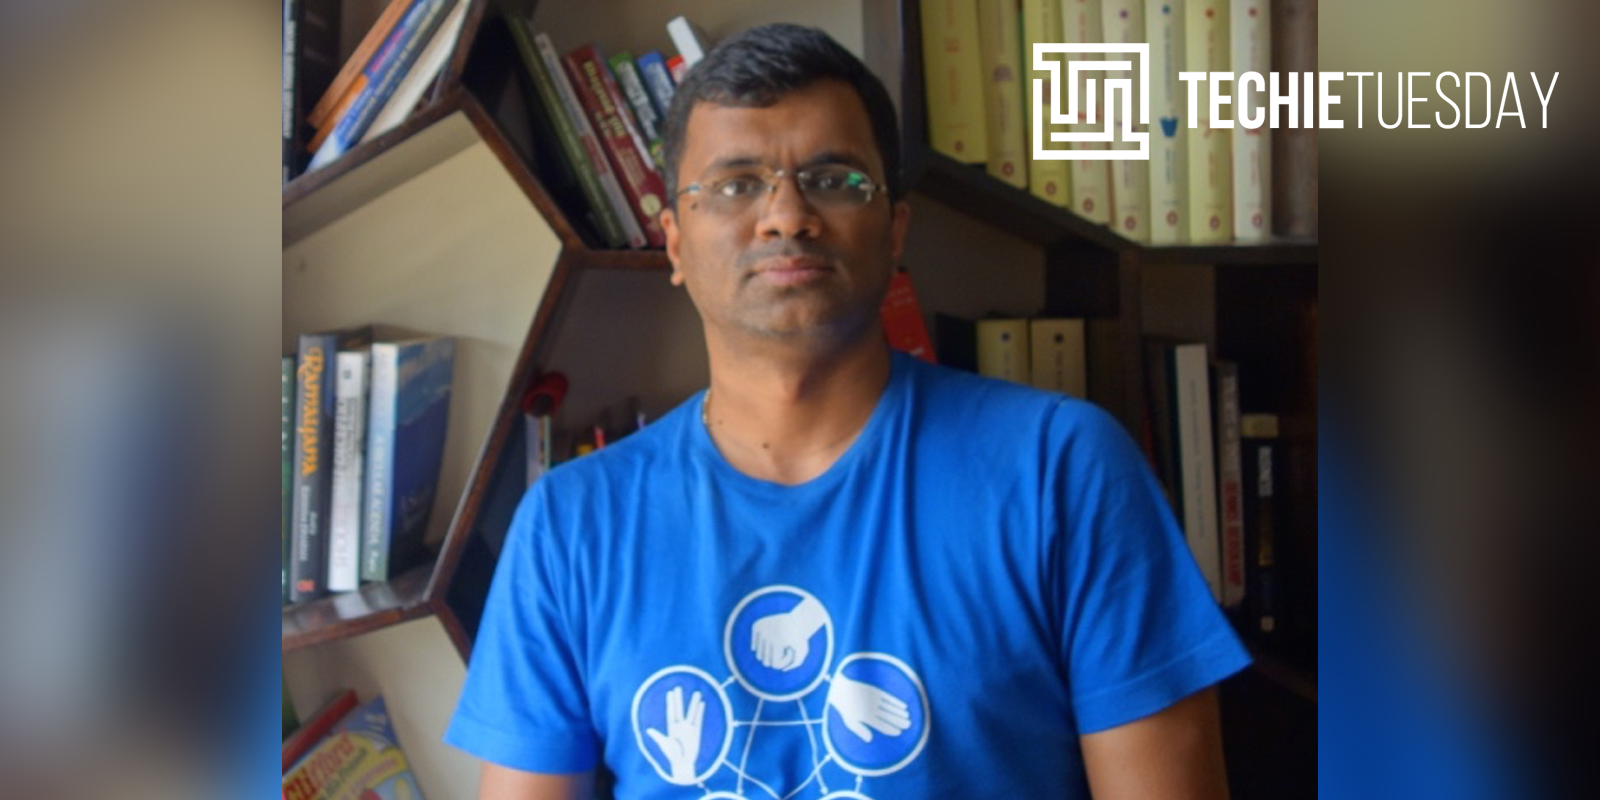 [Techie Tuesday] From Sasken and Infosys to Mindtree and now Near.Store, here's Ramakrishnan A's journey